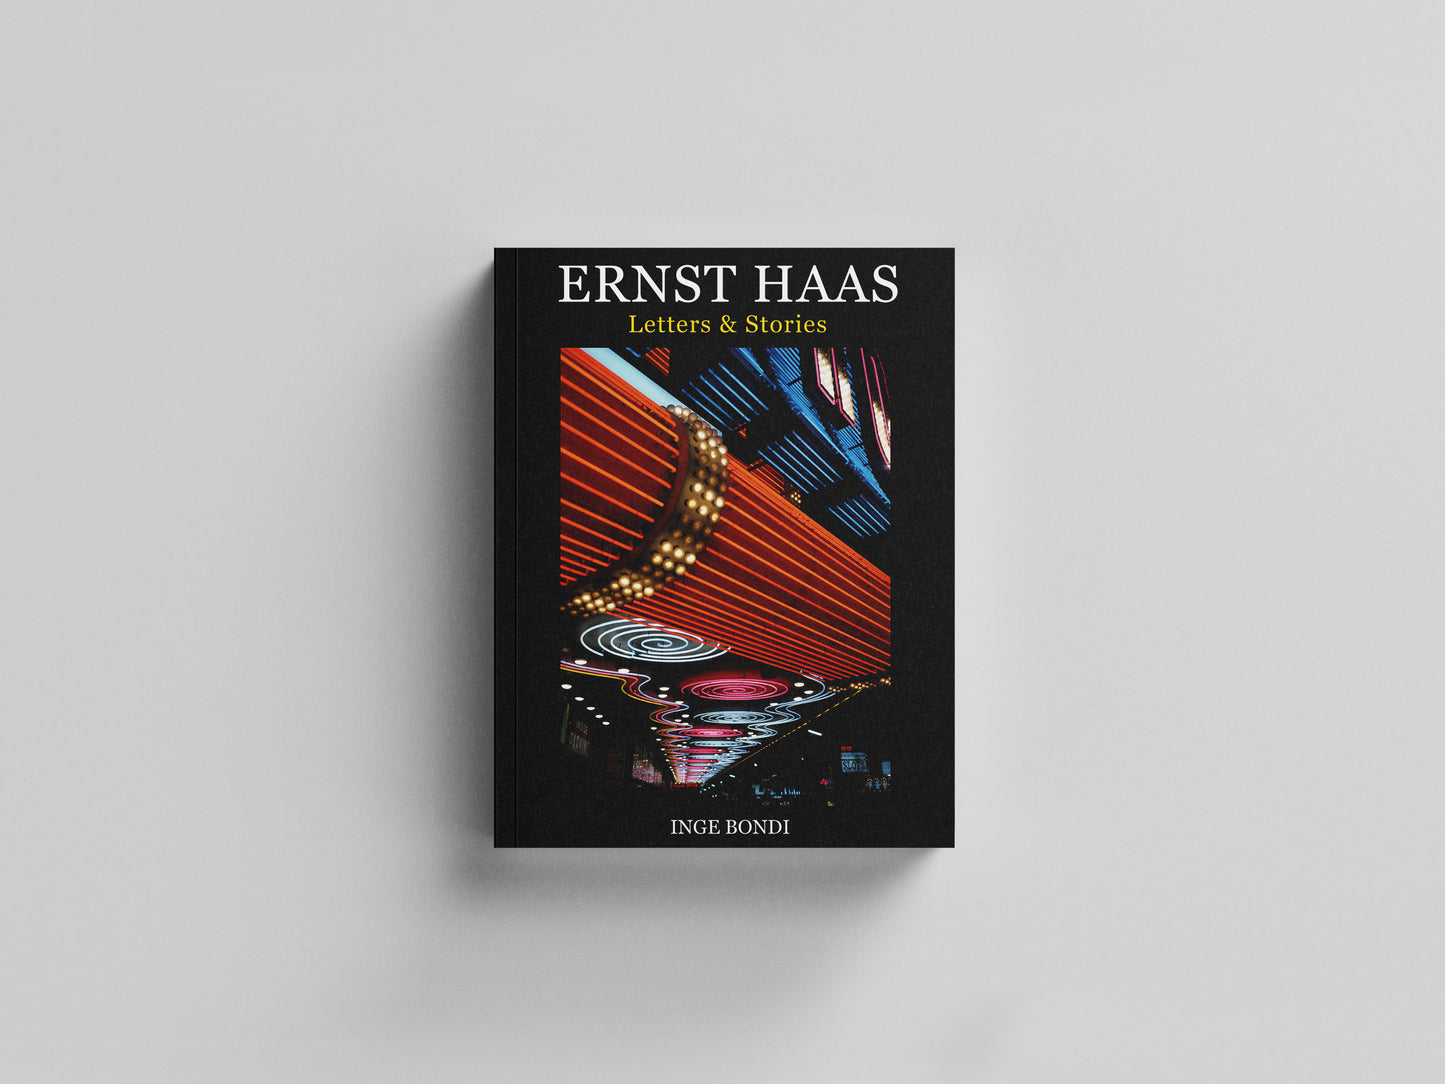 Ernst Haas: Letters & Stories